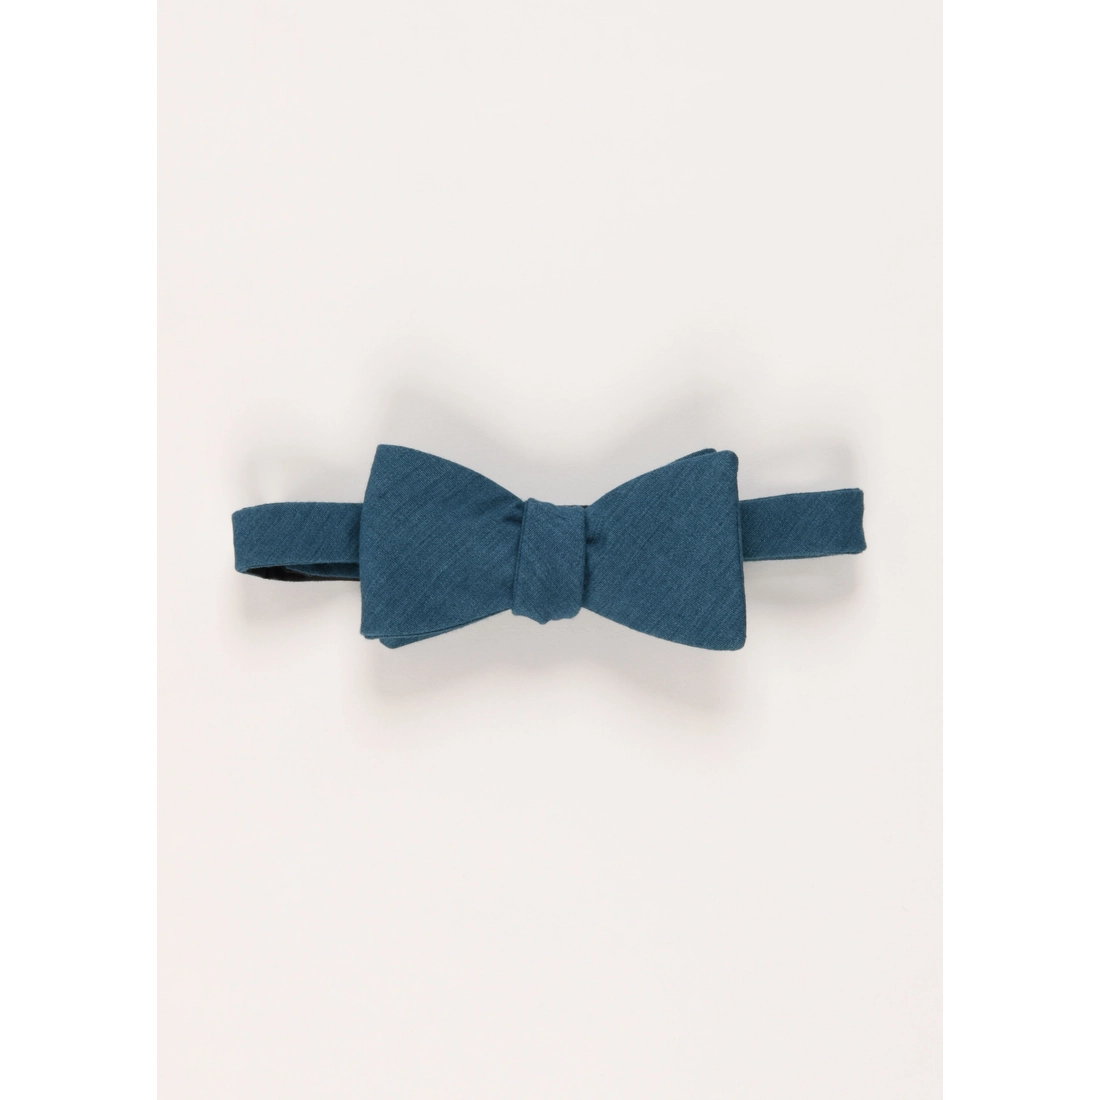 The Diplomat Bow Tie in Blue Cotton